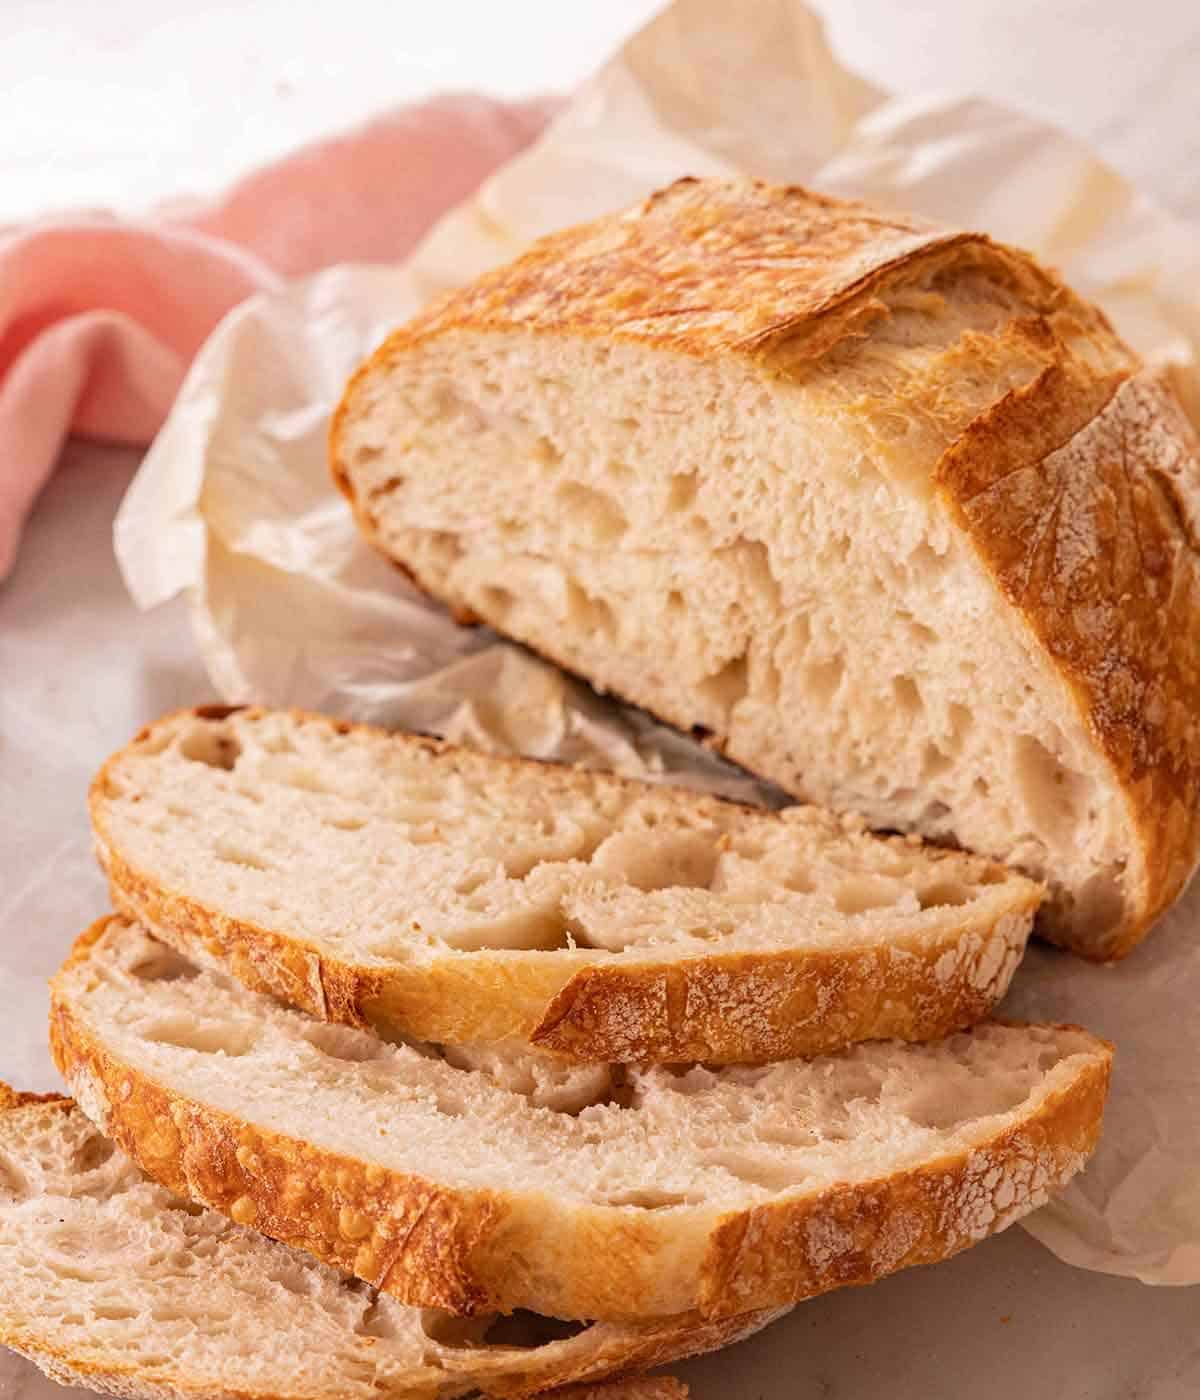 A loaf of sourdough bread with three slices cut in front of the loaf.